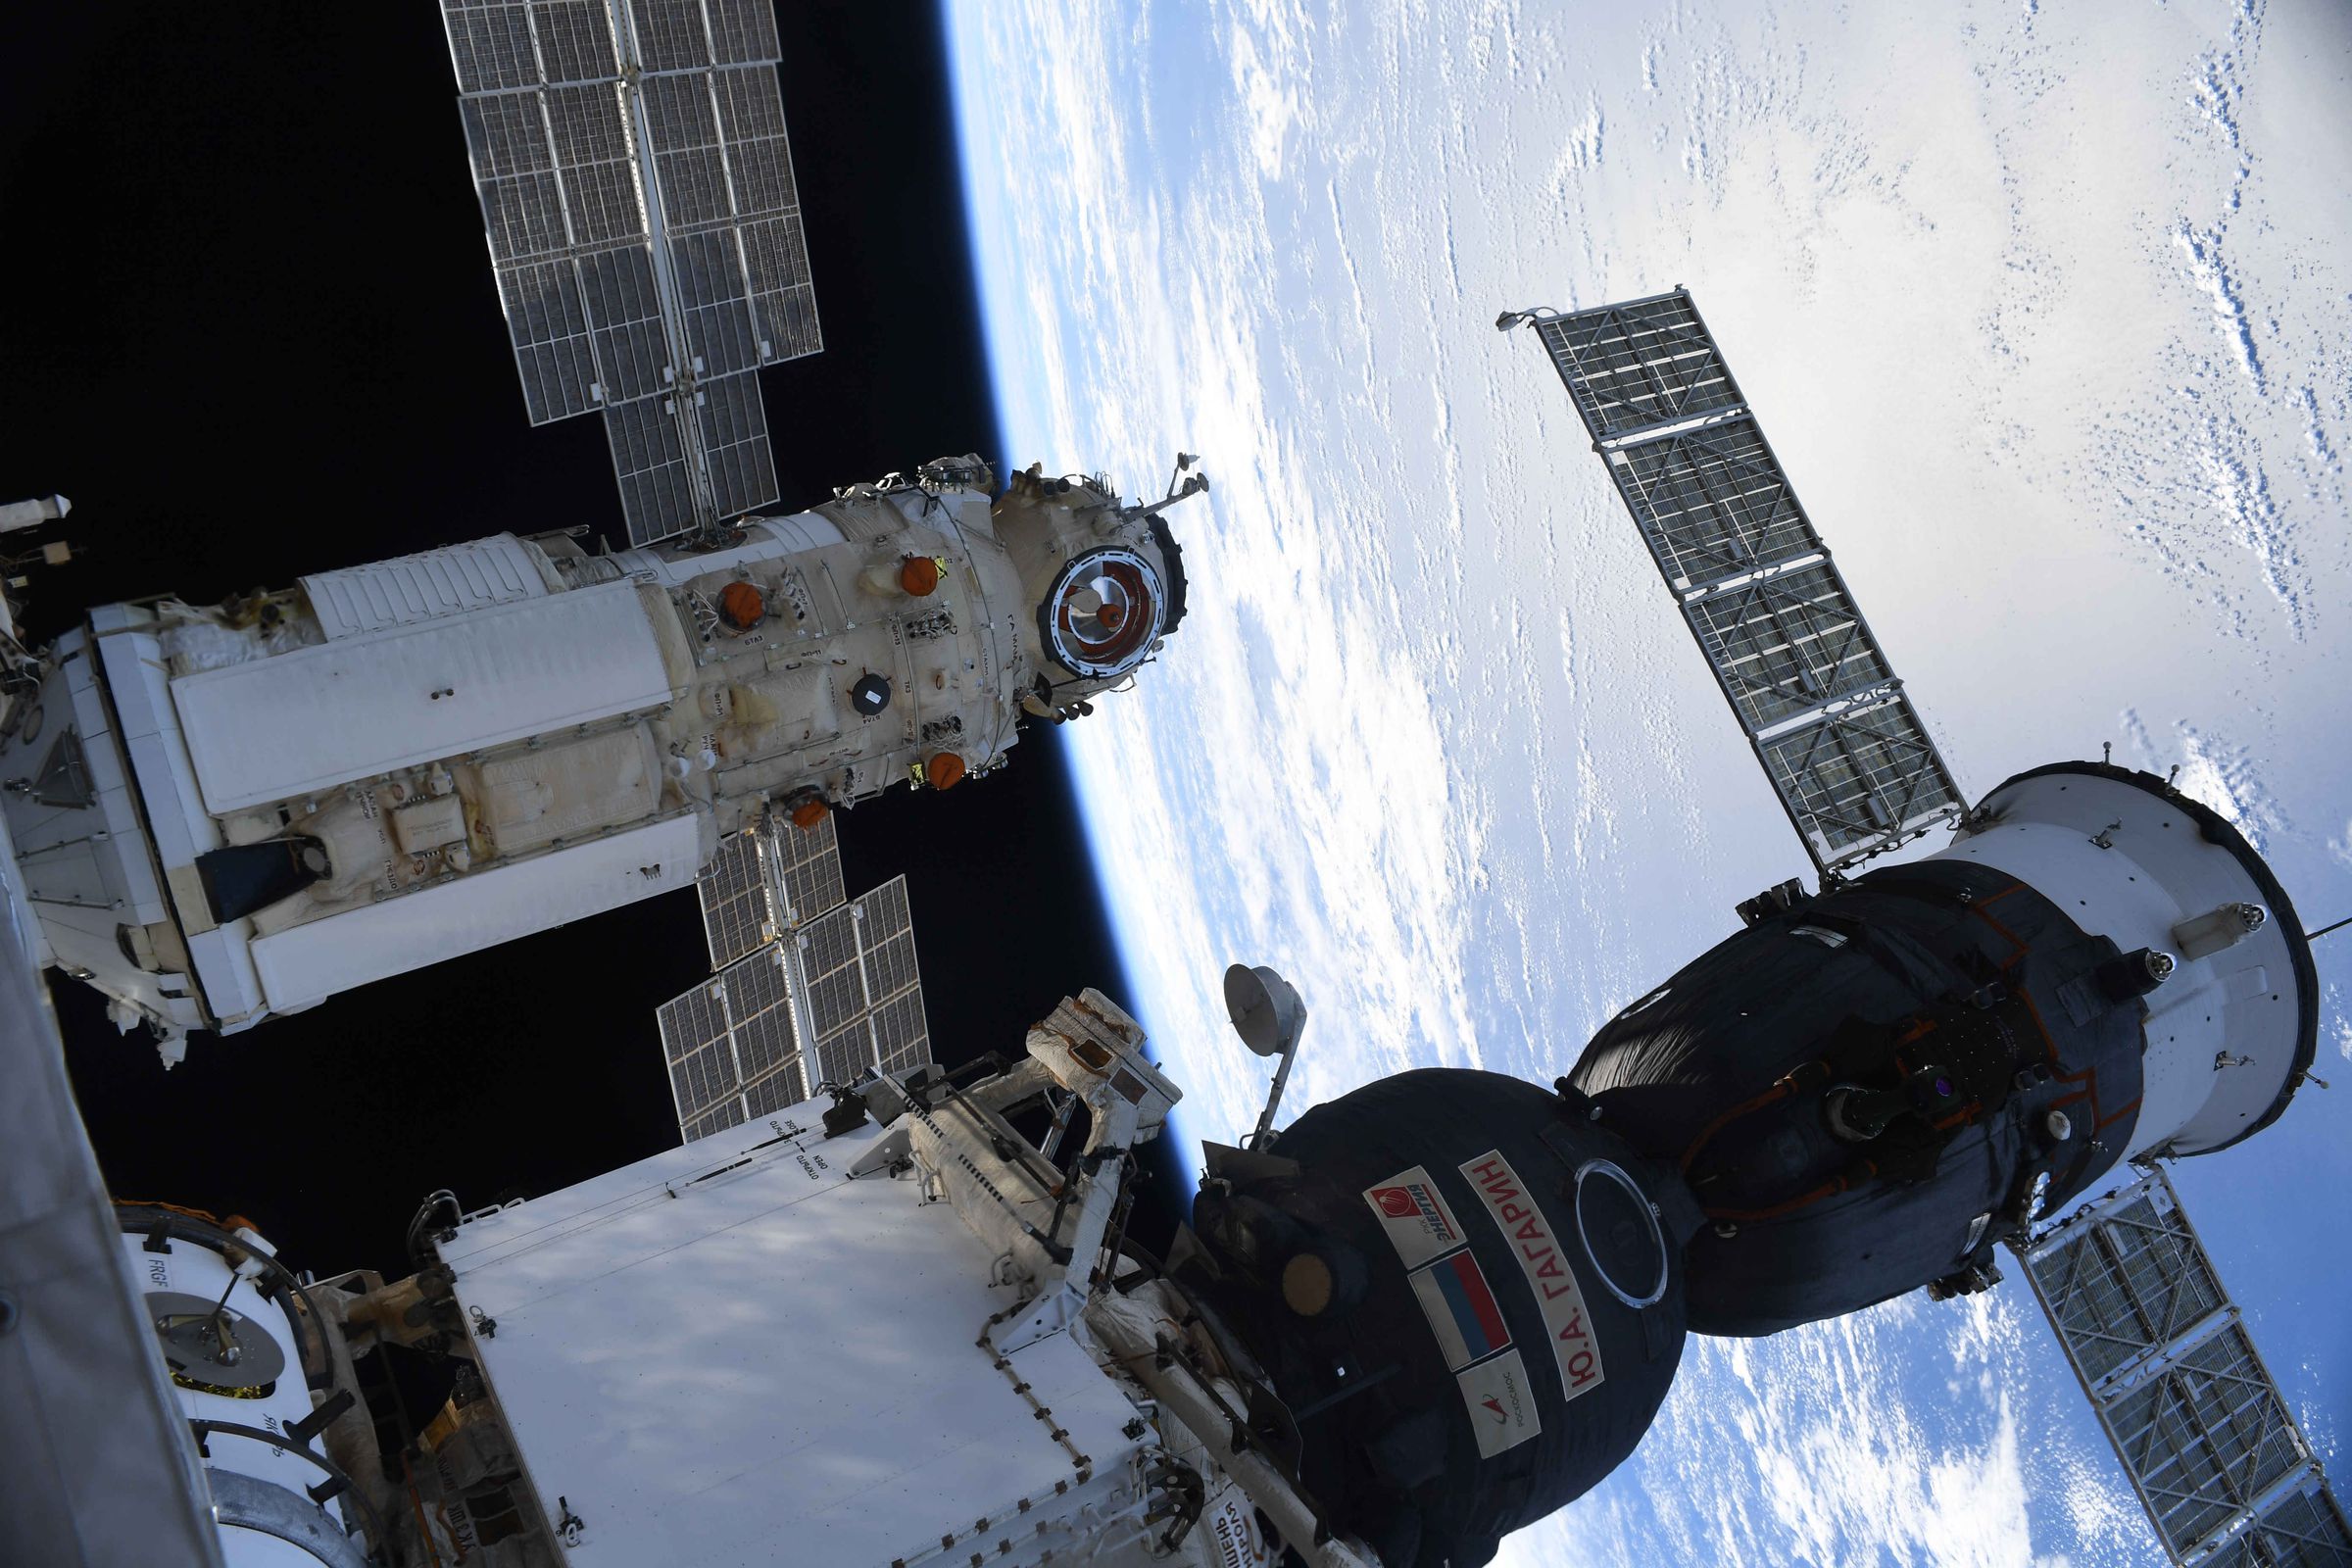 Russia’s Nauka module (left) docked to the International Space Station